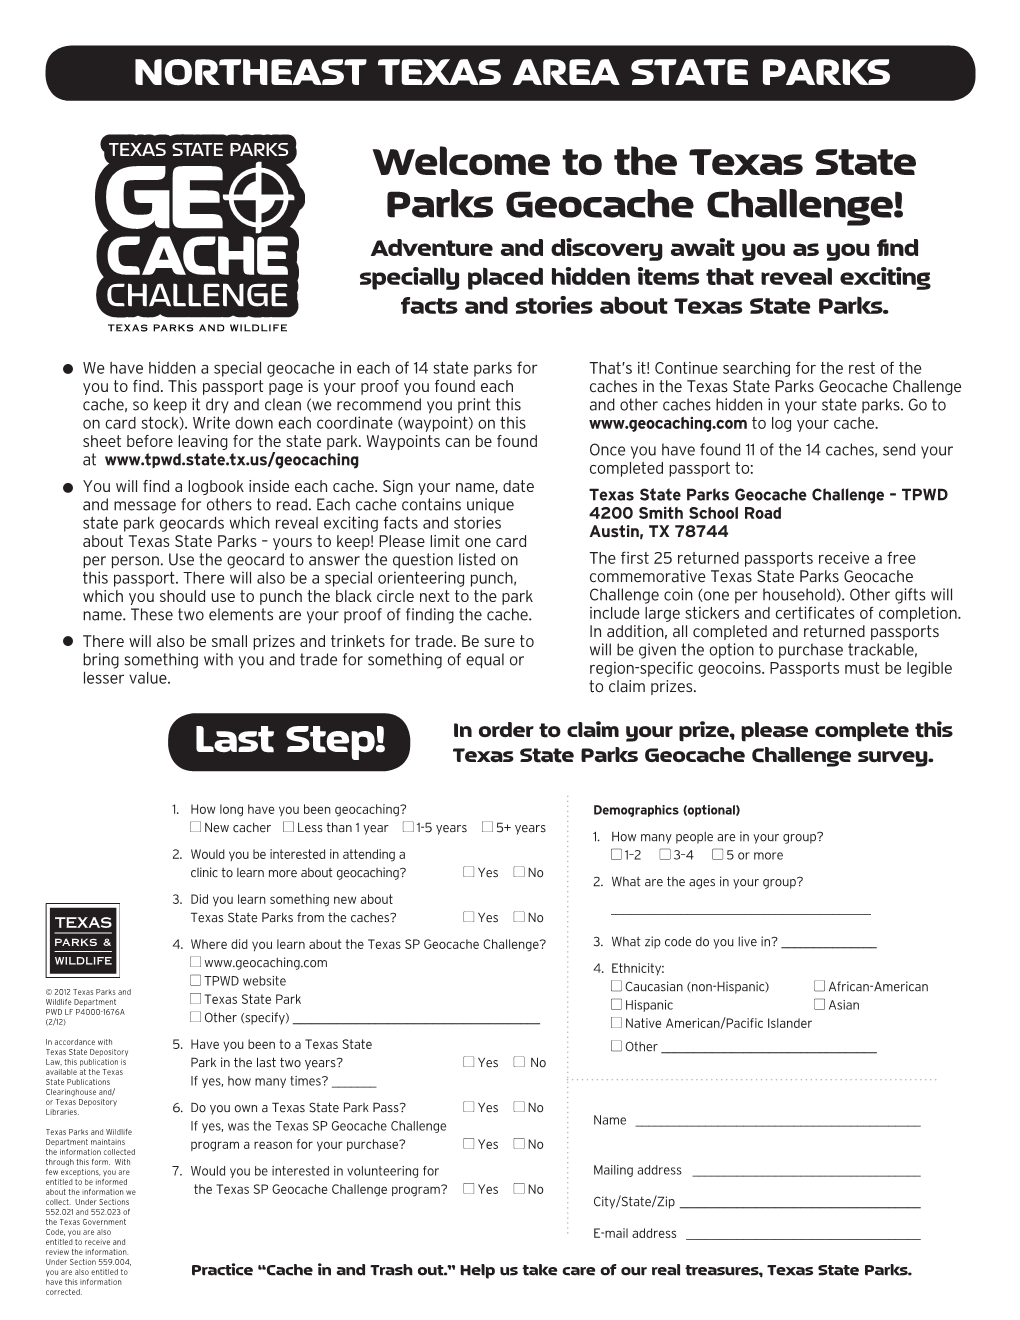 The Texas State Parks Geocache Challenge!